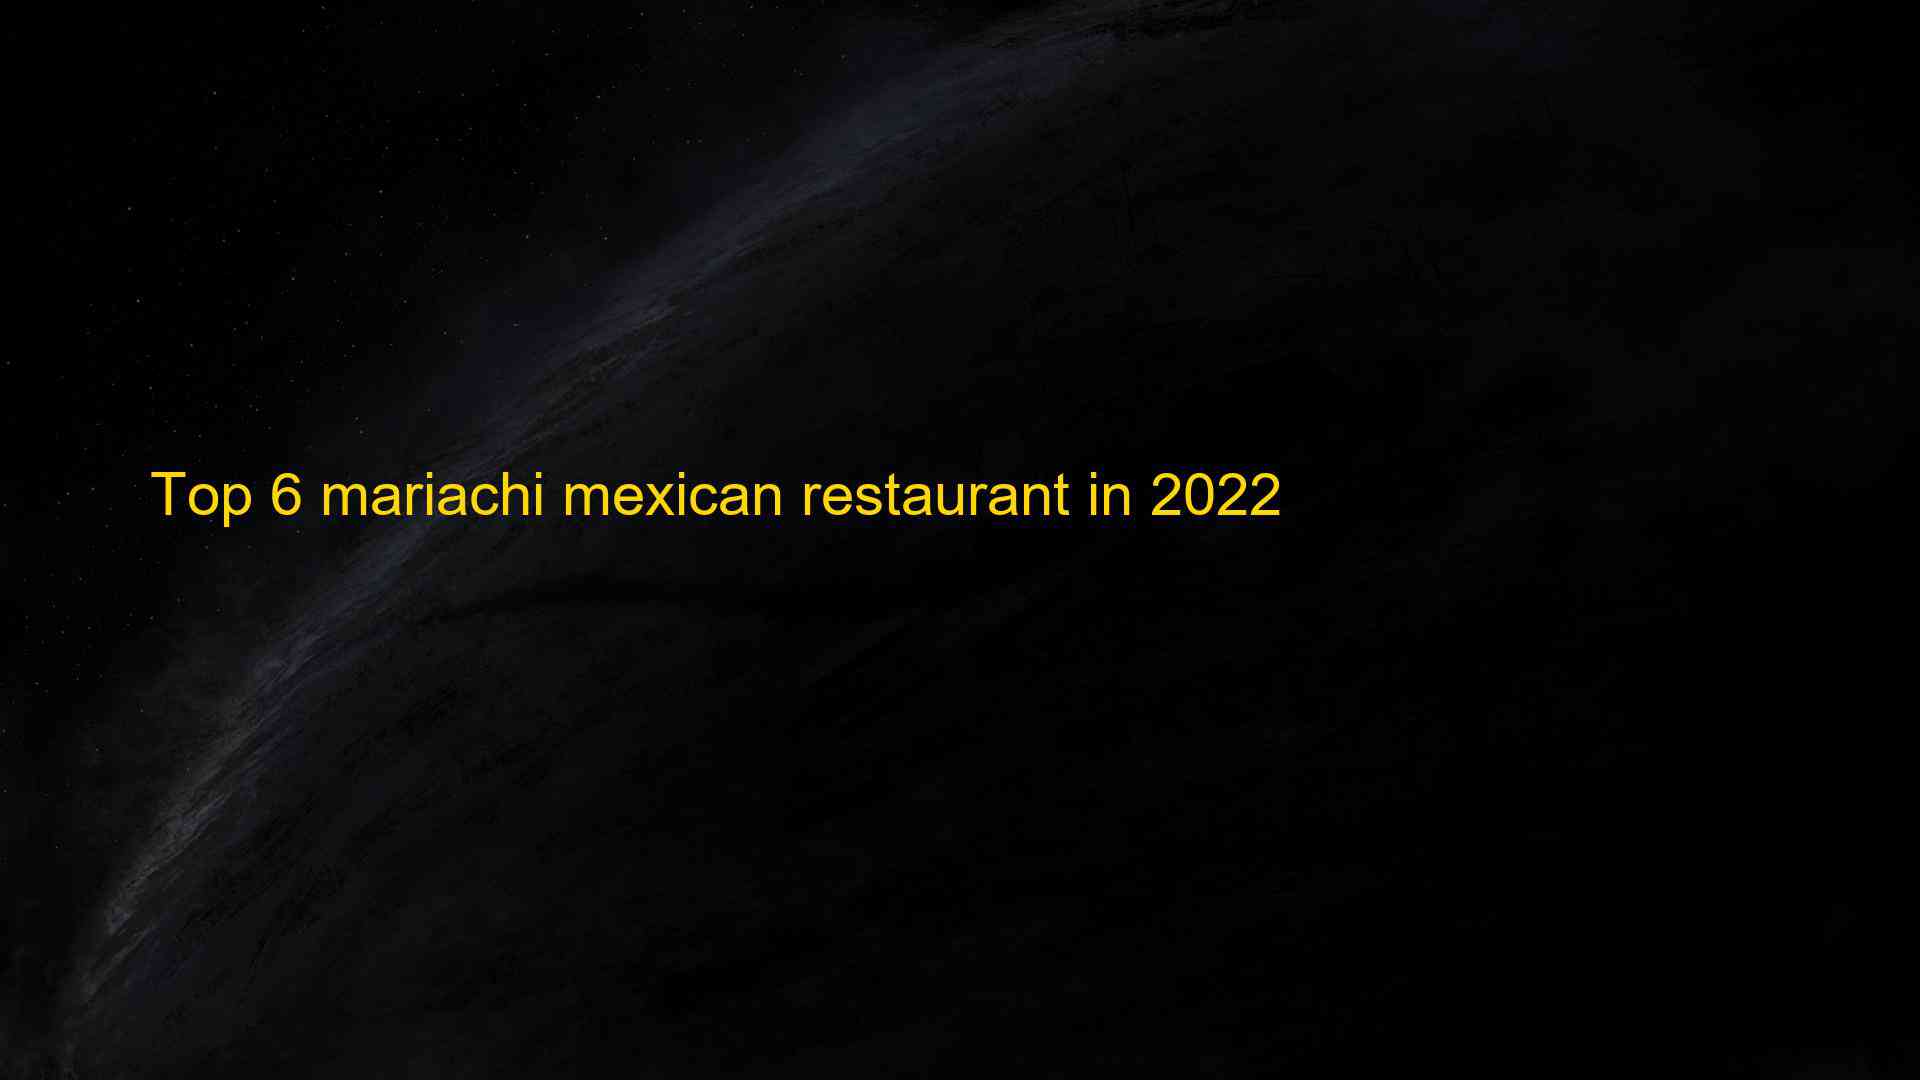 Top 6 mariachi mexican restaurant in 2022 1662842865